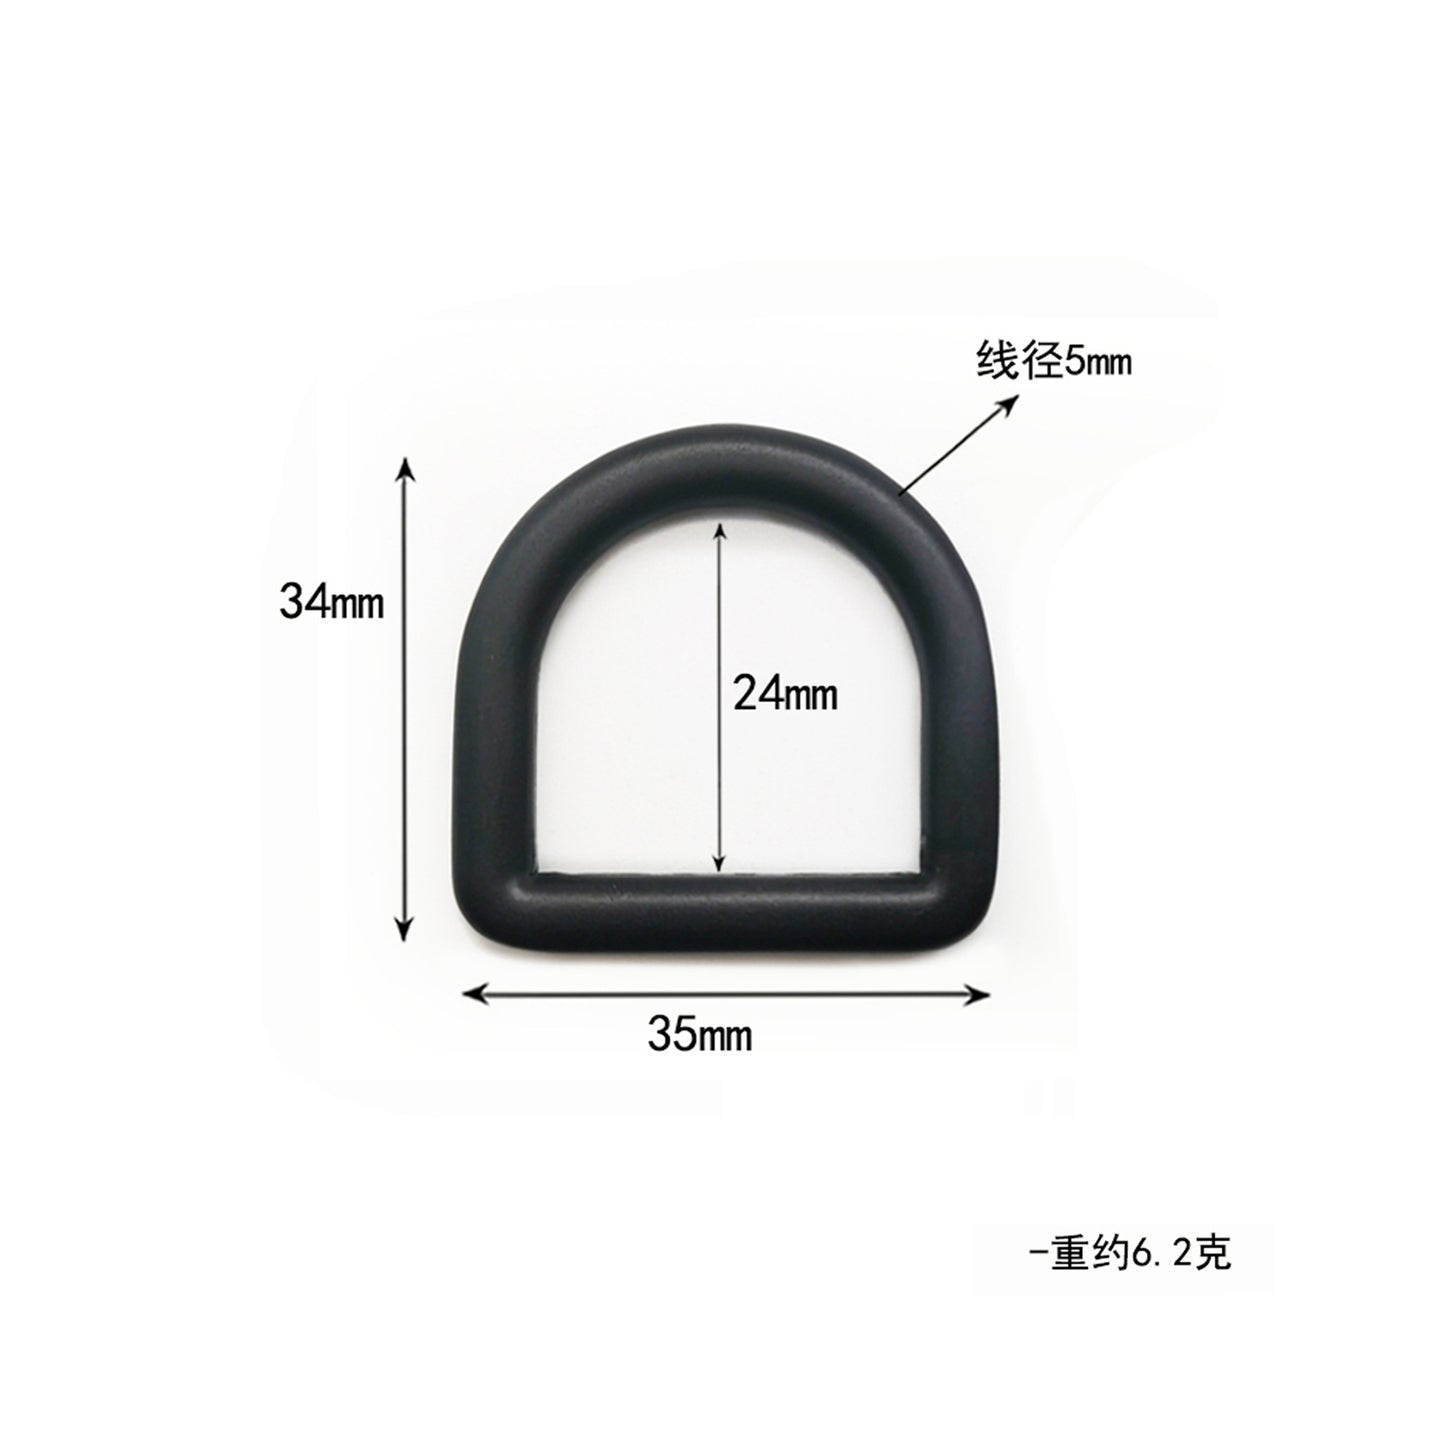 D-shaped Buckle Aviation Aluminum D-Ring Adjustable Clip Semi-Circular D-Ring Dog Clip Luggage and Bag Hardware Accessories-7